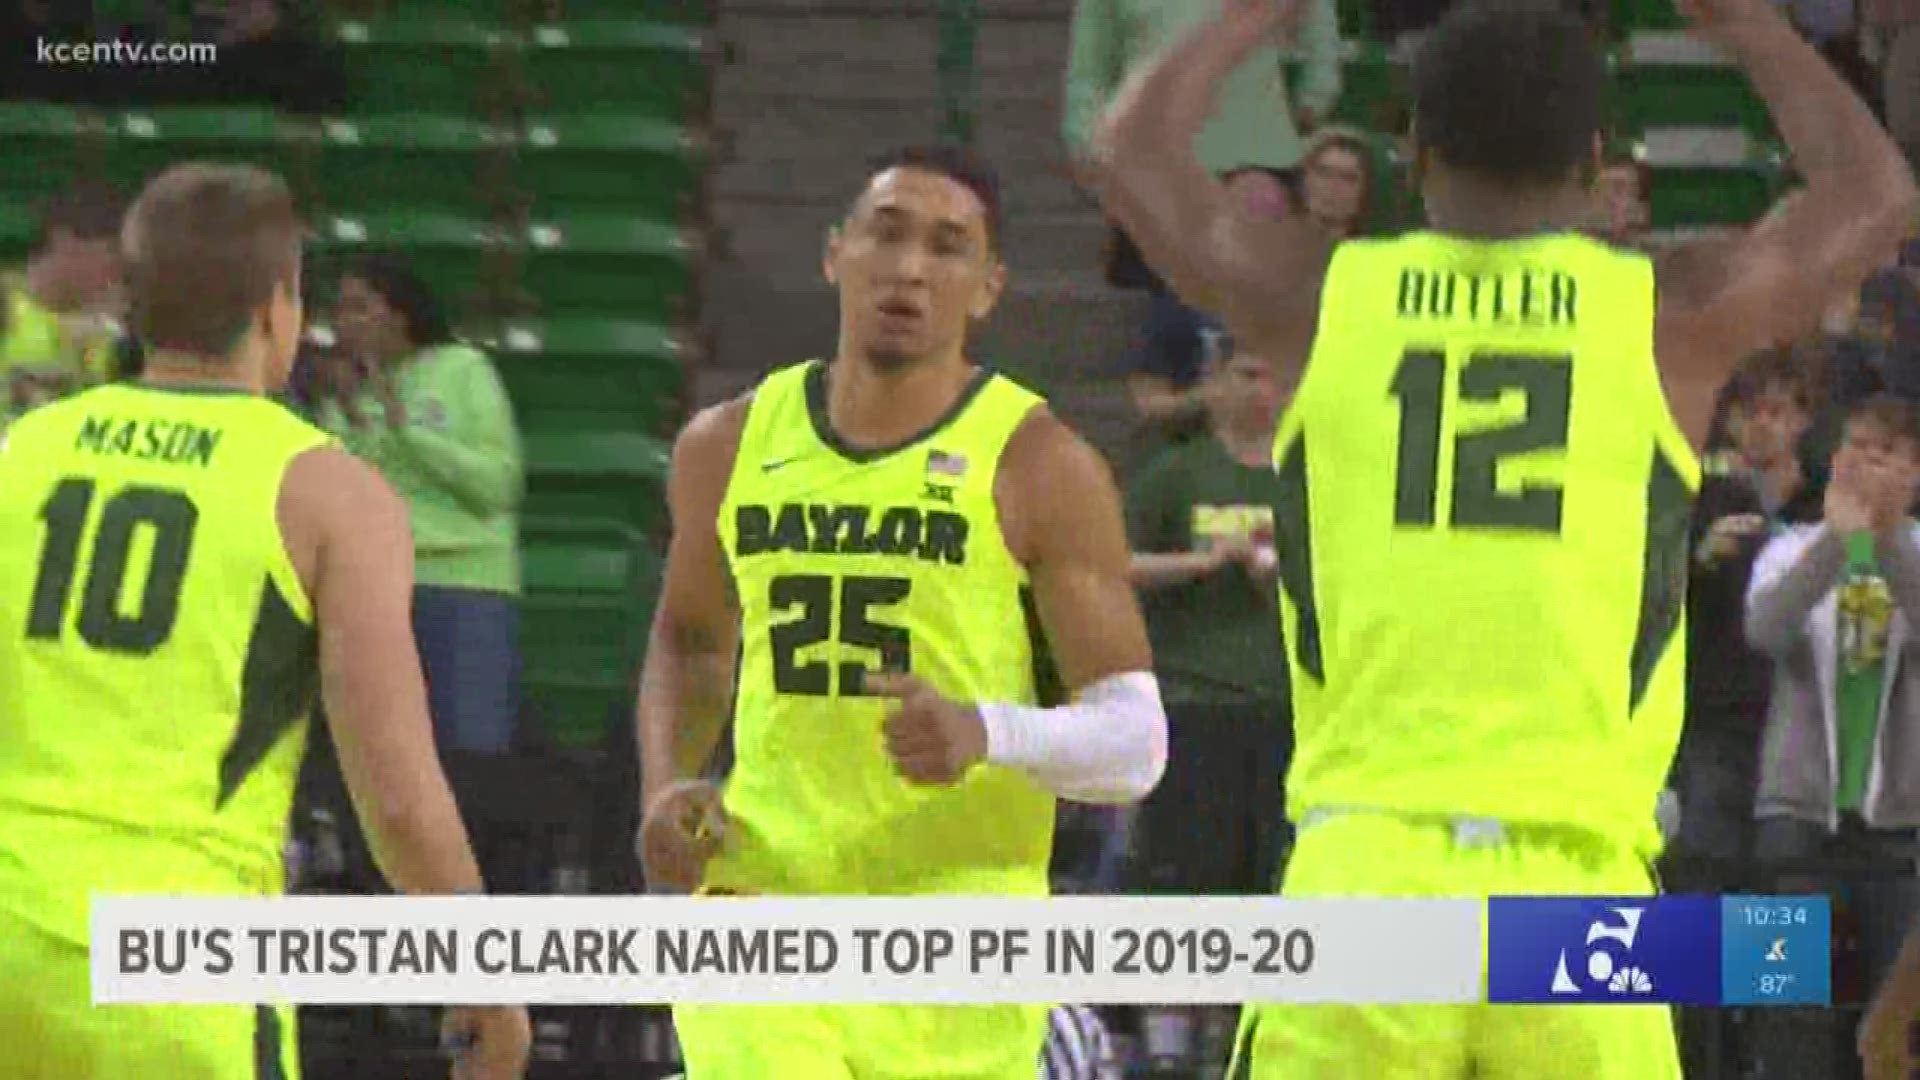 College insider Andy Katz has named Tristan Clark the top candidate to win the Karl Malone Award this upcoming season, which is given to the best power forward in the country.